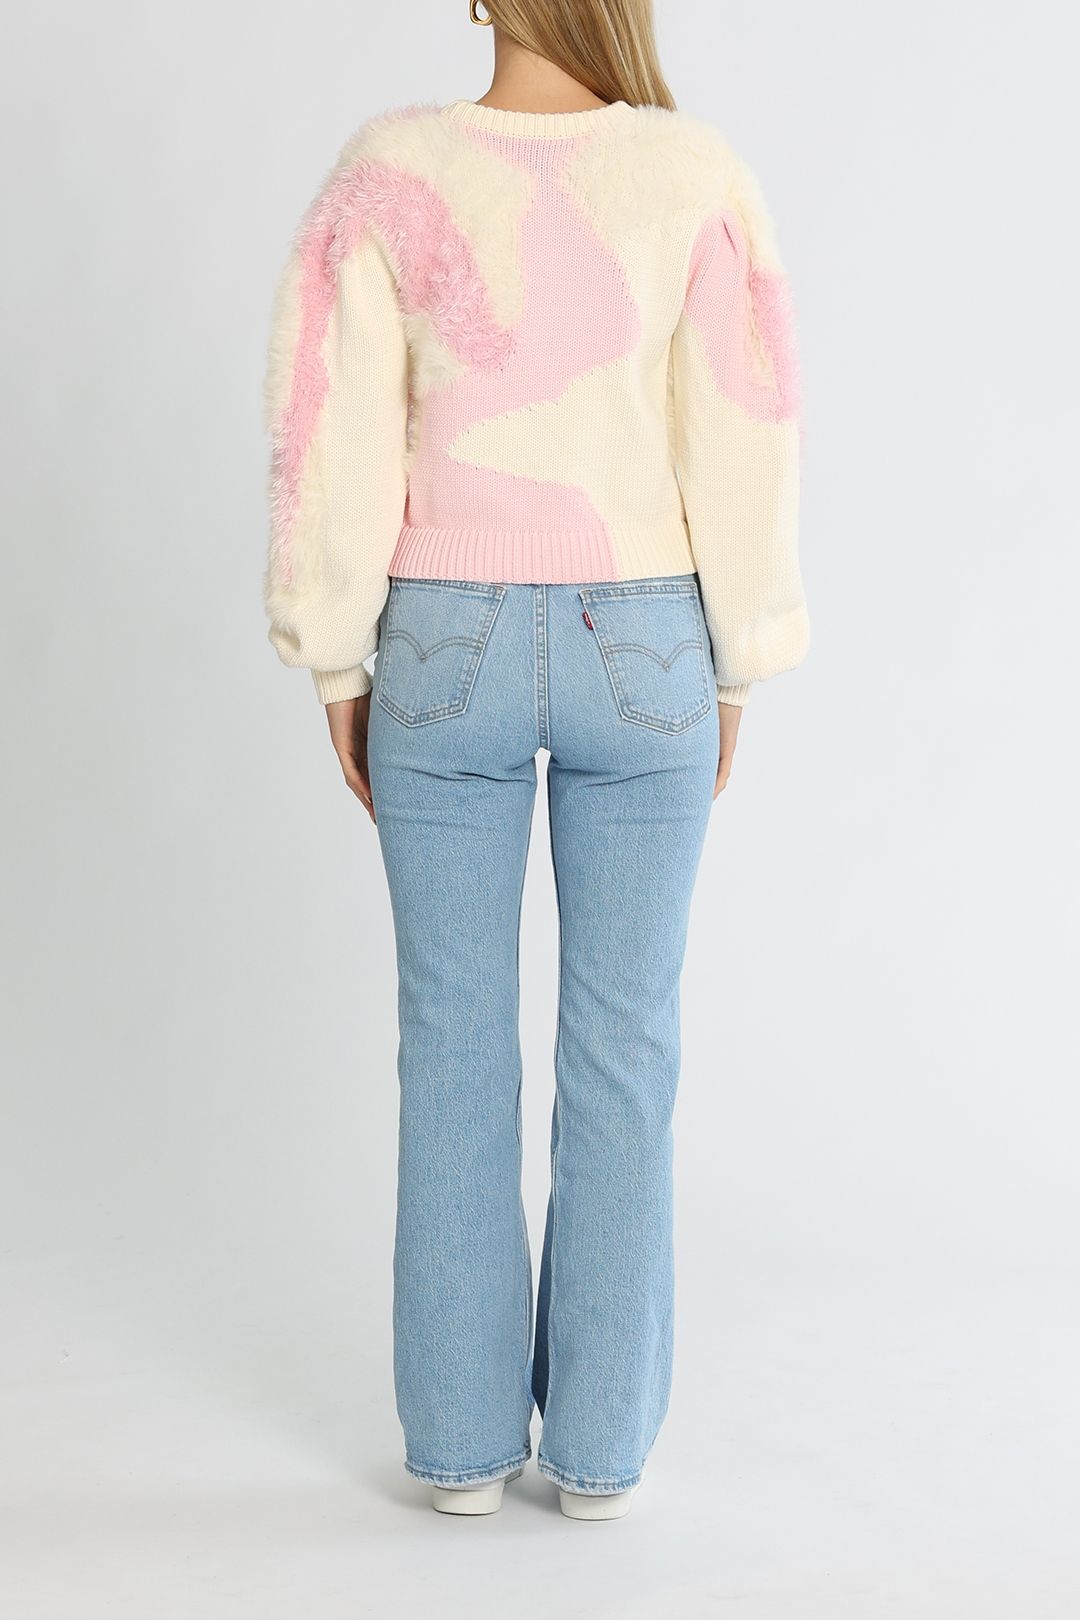 AJE Dominique Knit Jumper Pink Cropped